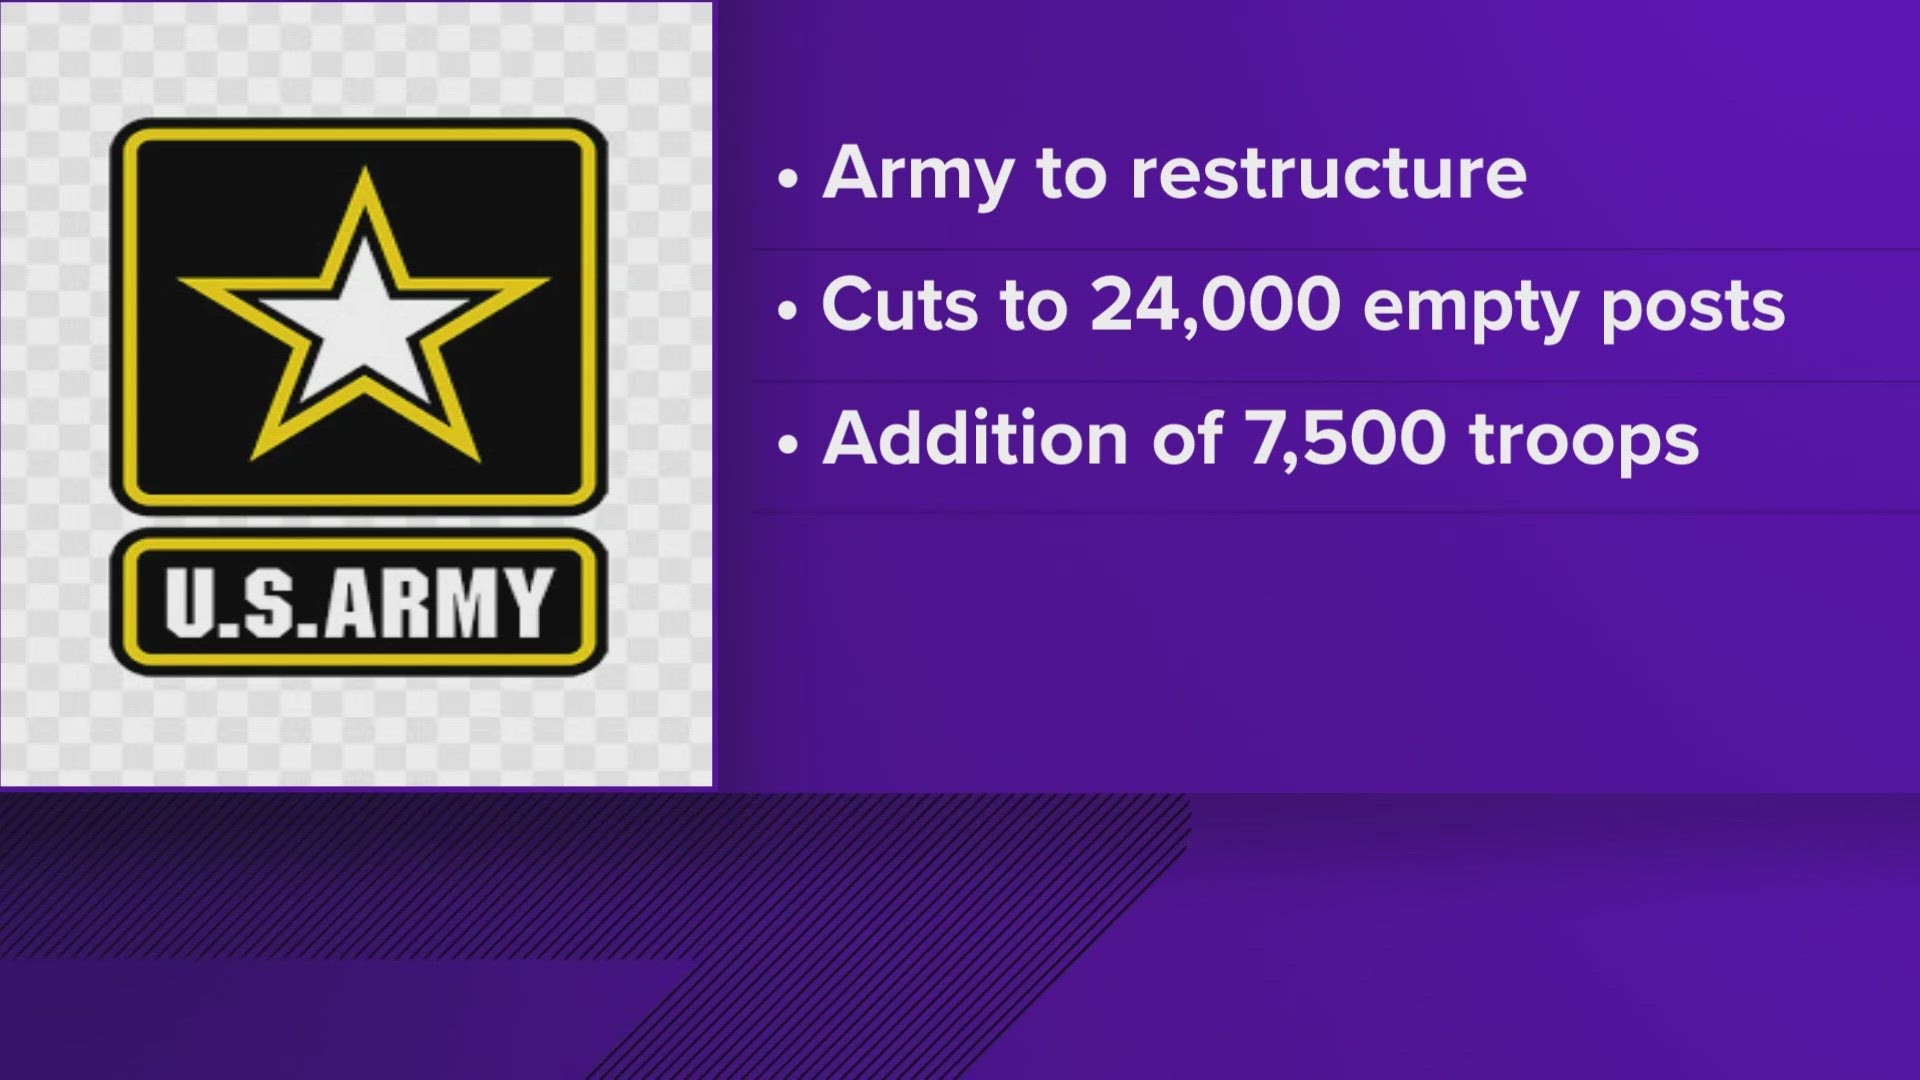 The U.S. Army said it is cutting back on jobs, but it won't lose any soldiers.